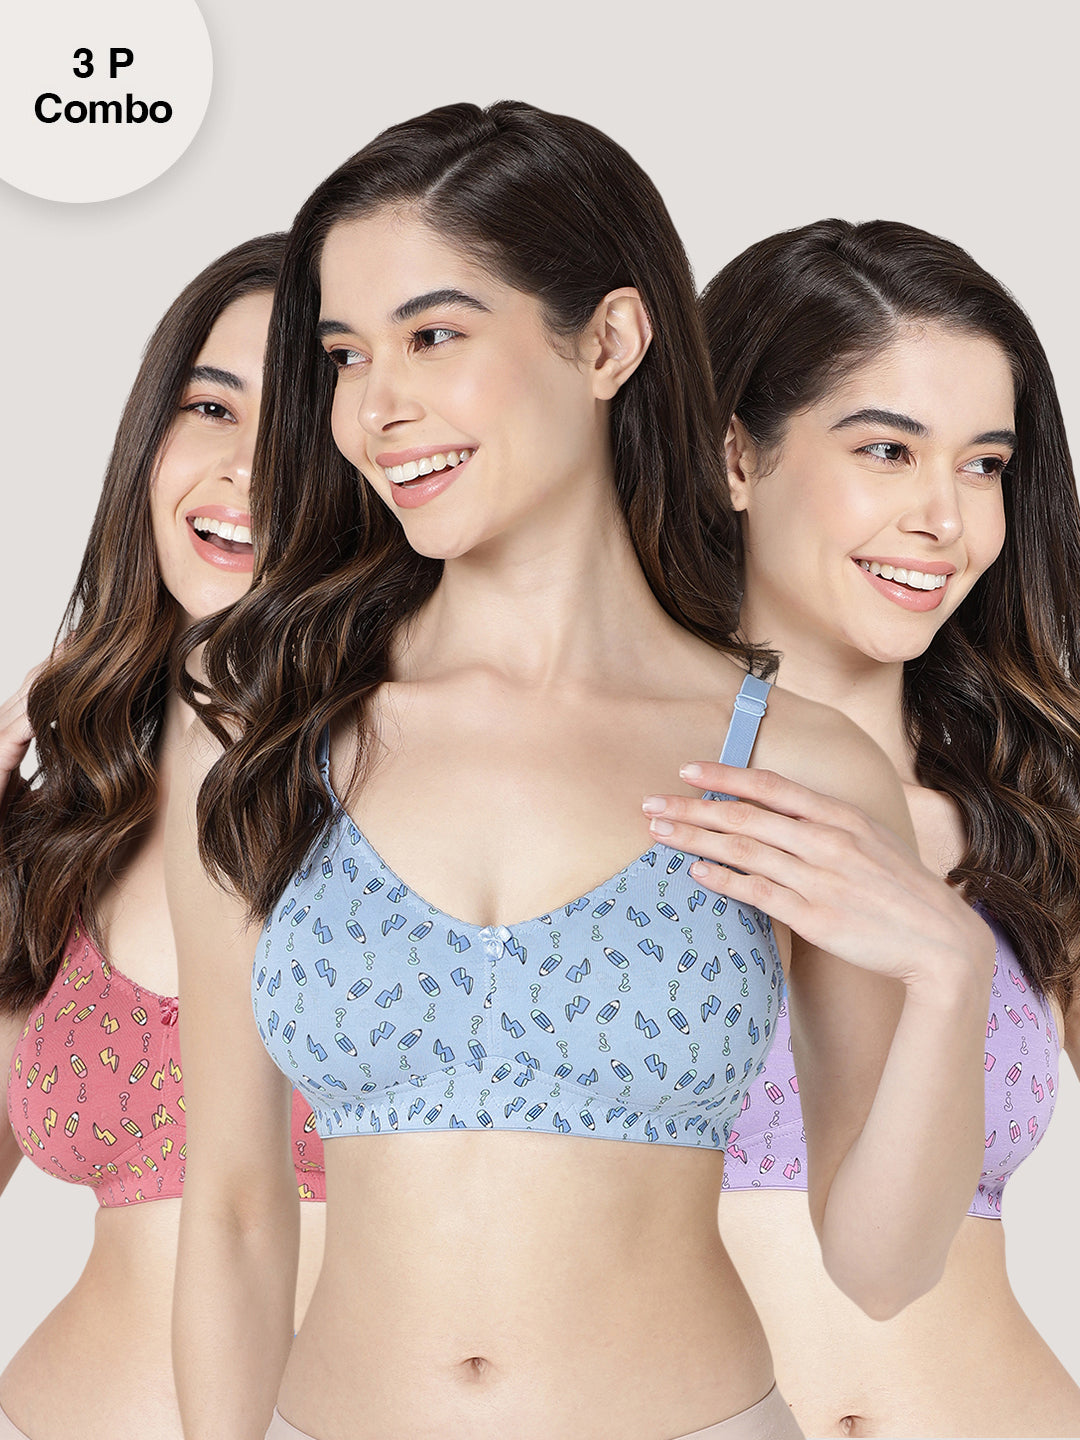 Rk Collection A Complete Lingiere shopee - Full coverage bra from the house  of kalyani innerwear with specer fabric for all day comfort and gives  stylish look. visit @arkies_fashion now #brashoping #innerwear #